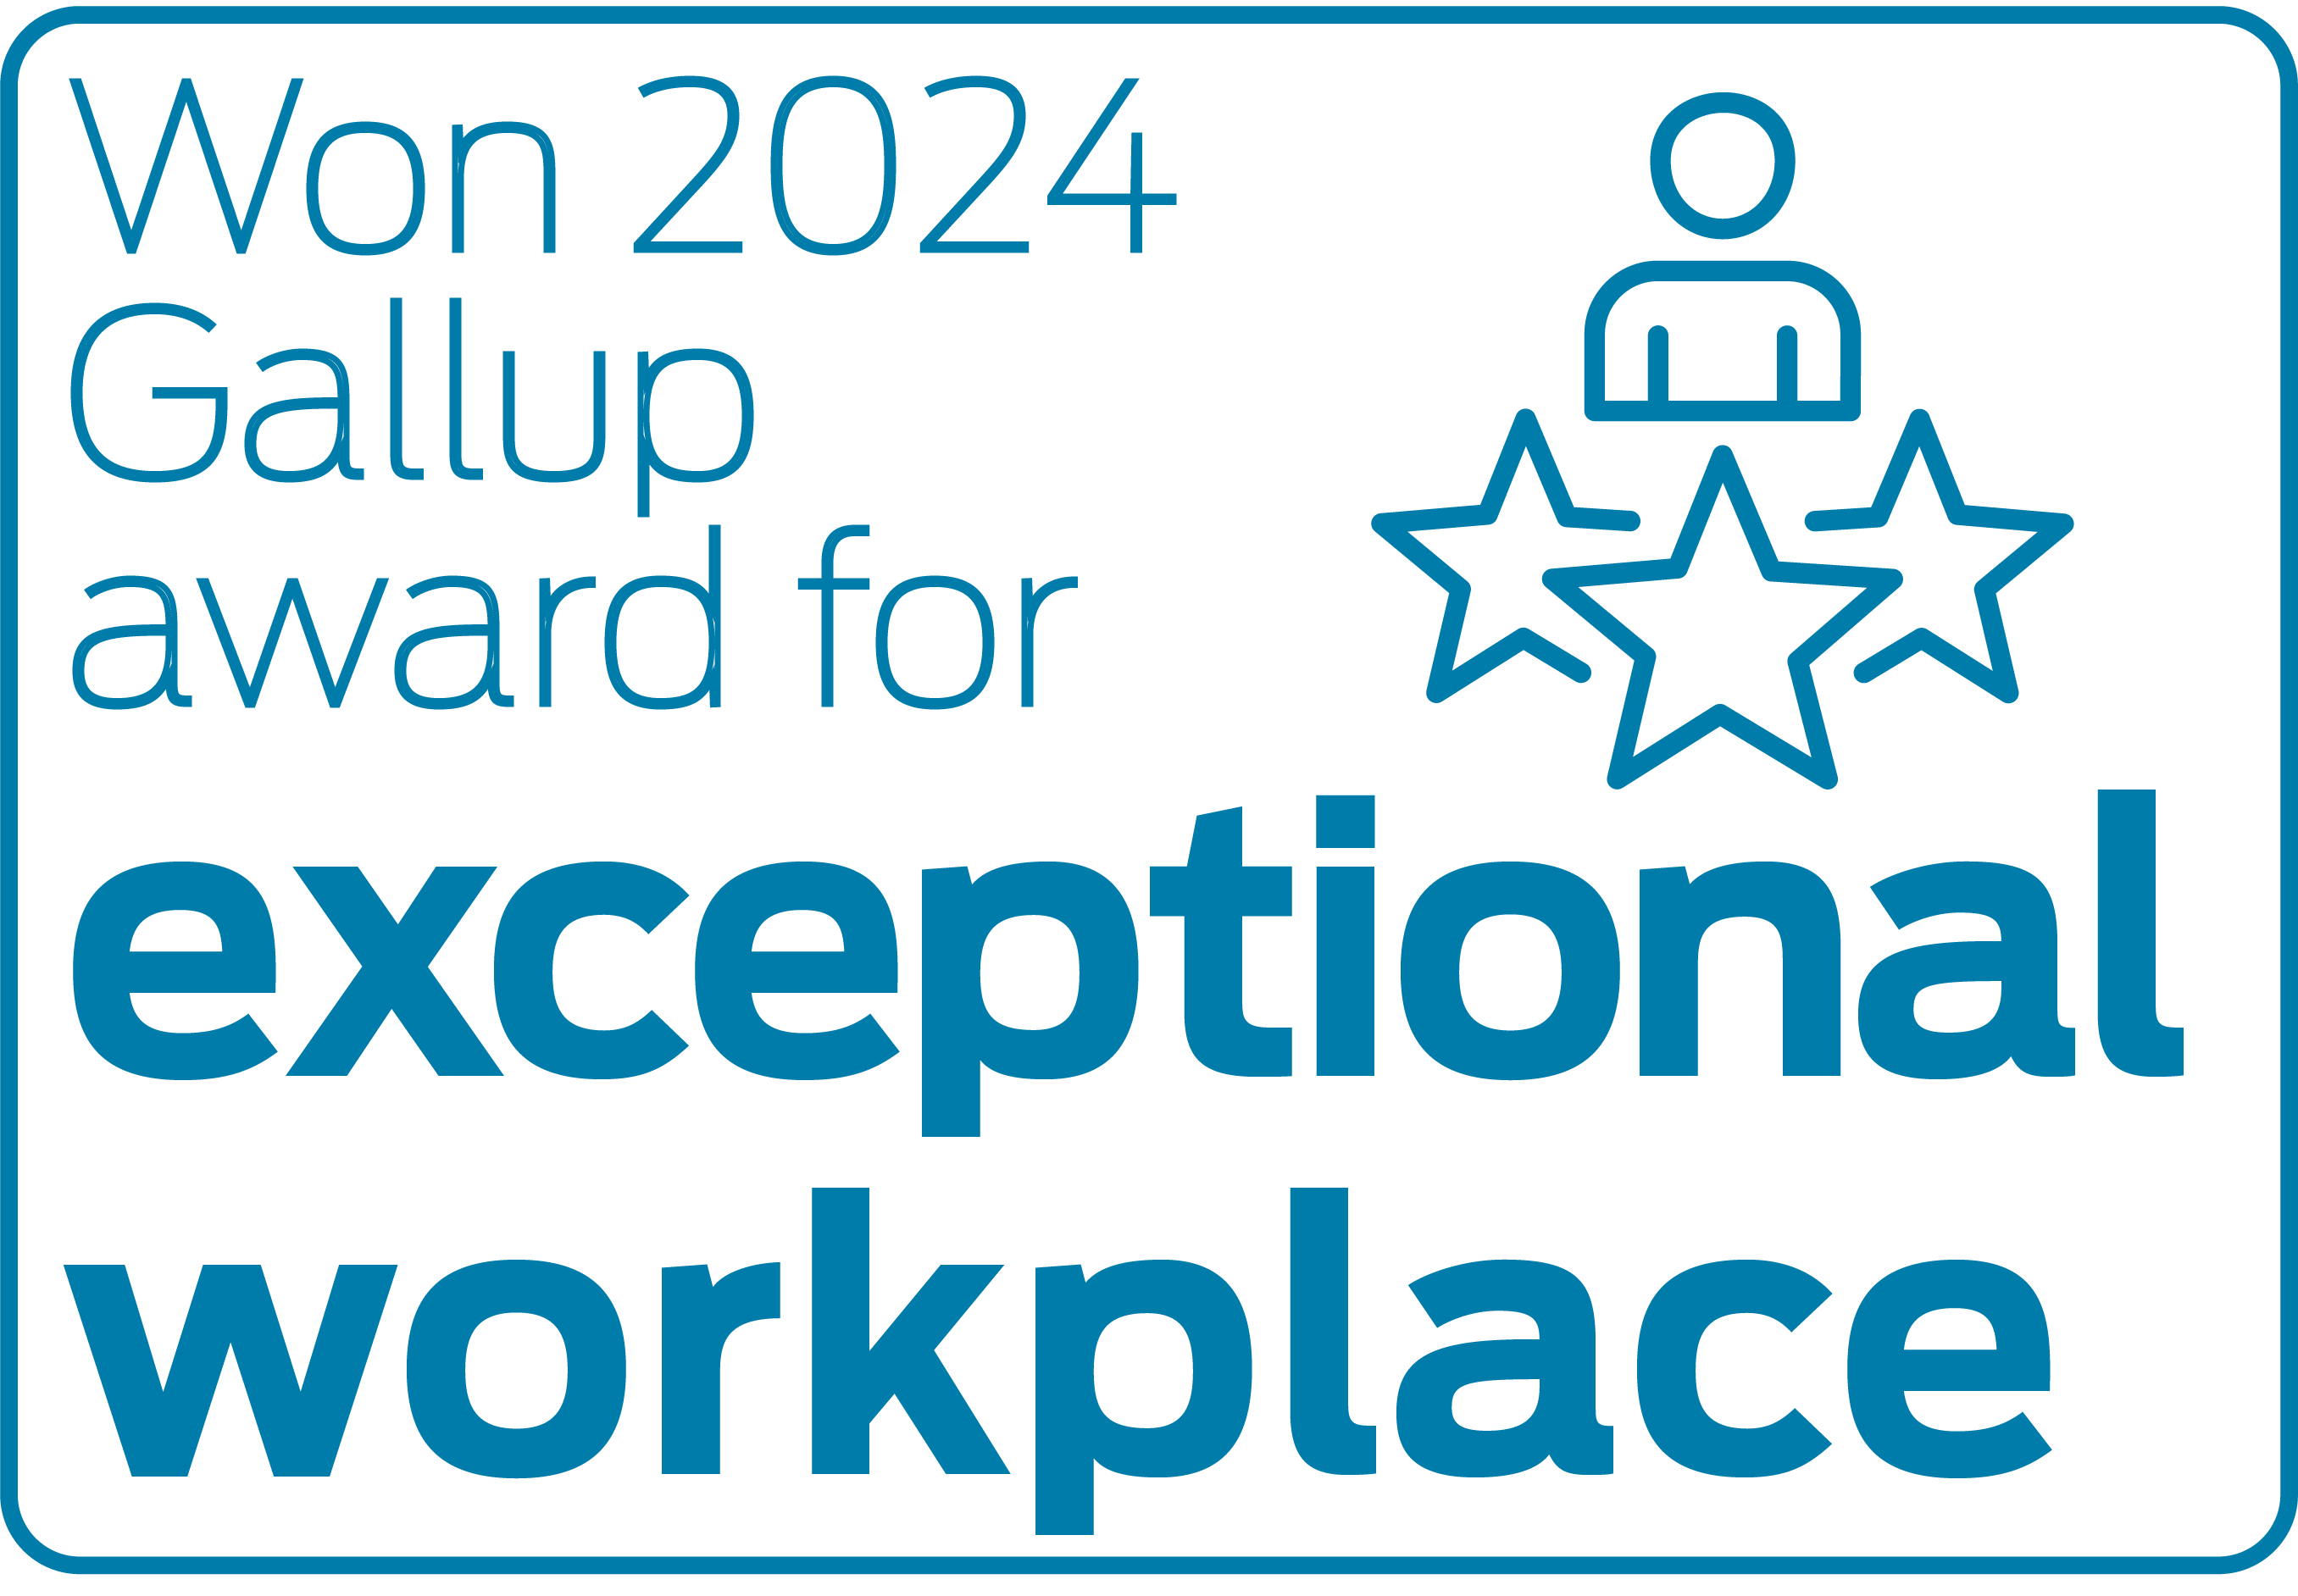 Won 2024 Gallup award for exceptional workplace